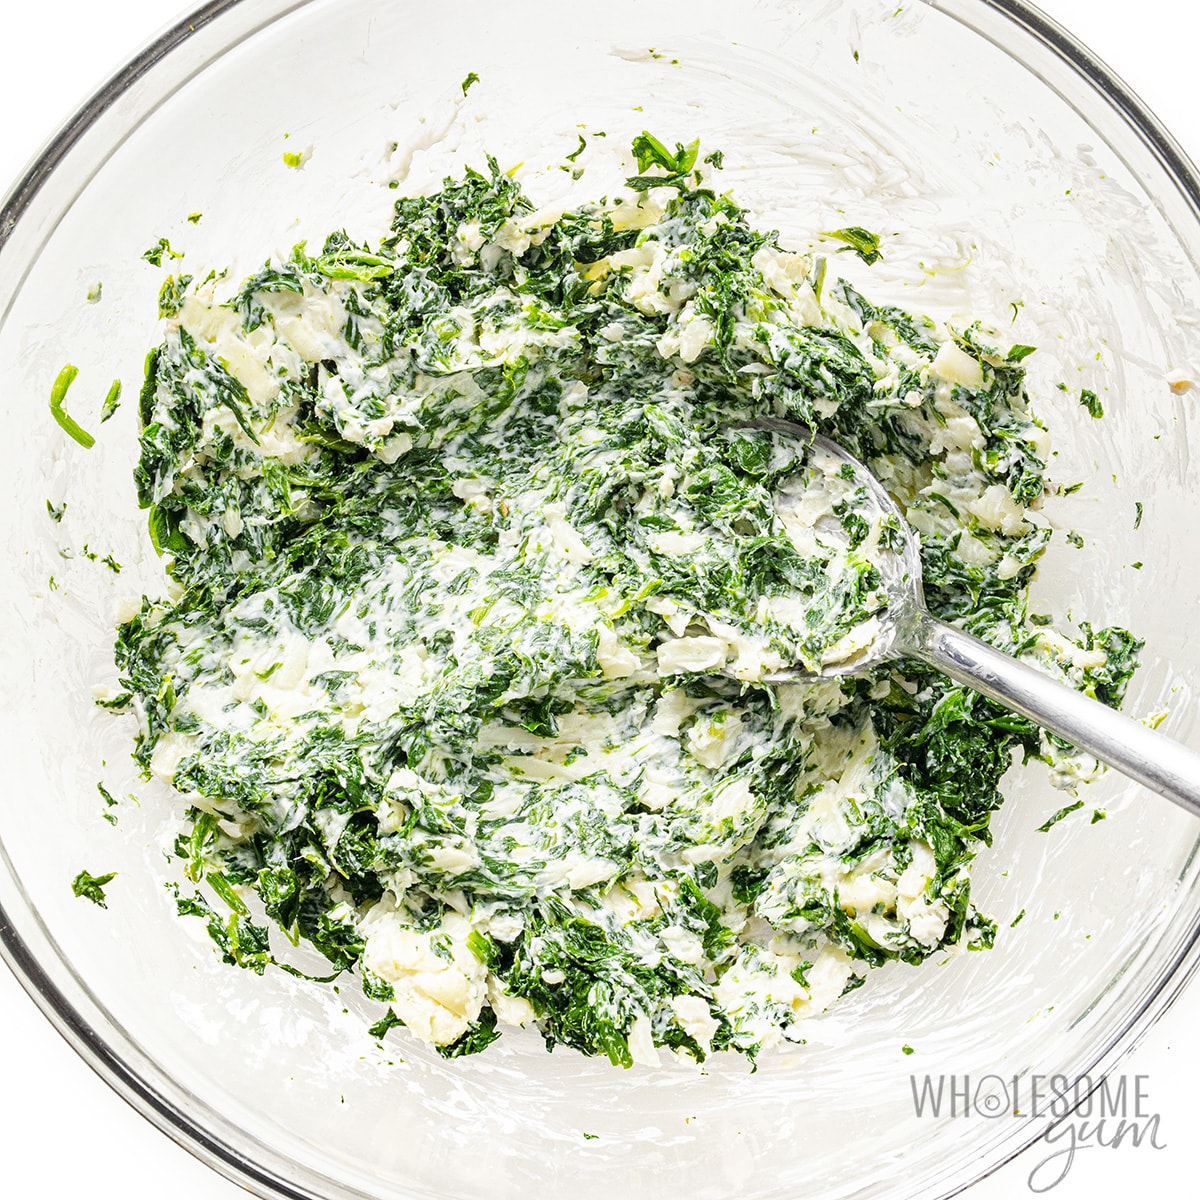 Combine spinach in bowl with cheese mixture.